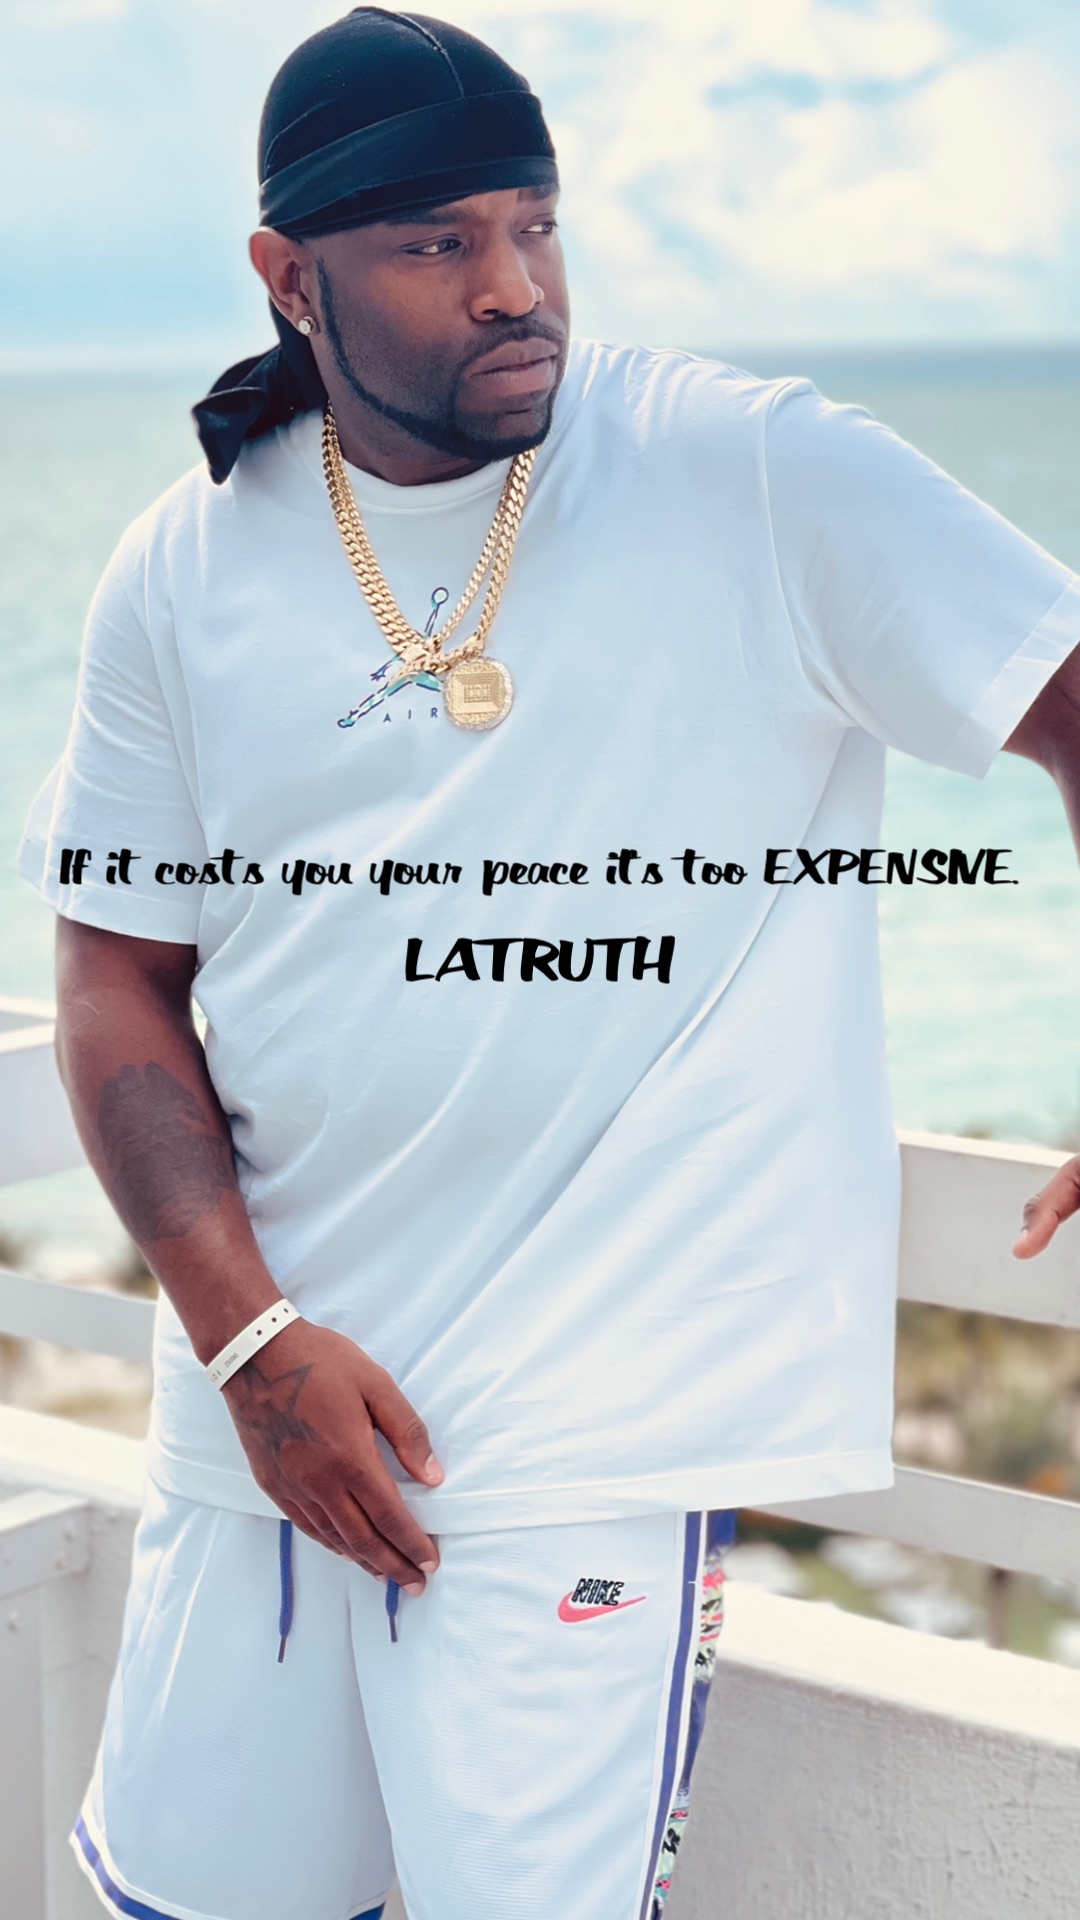 If it costs you your peace it’s too EXPENSIVE. LATRUTH